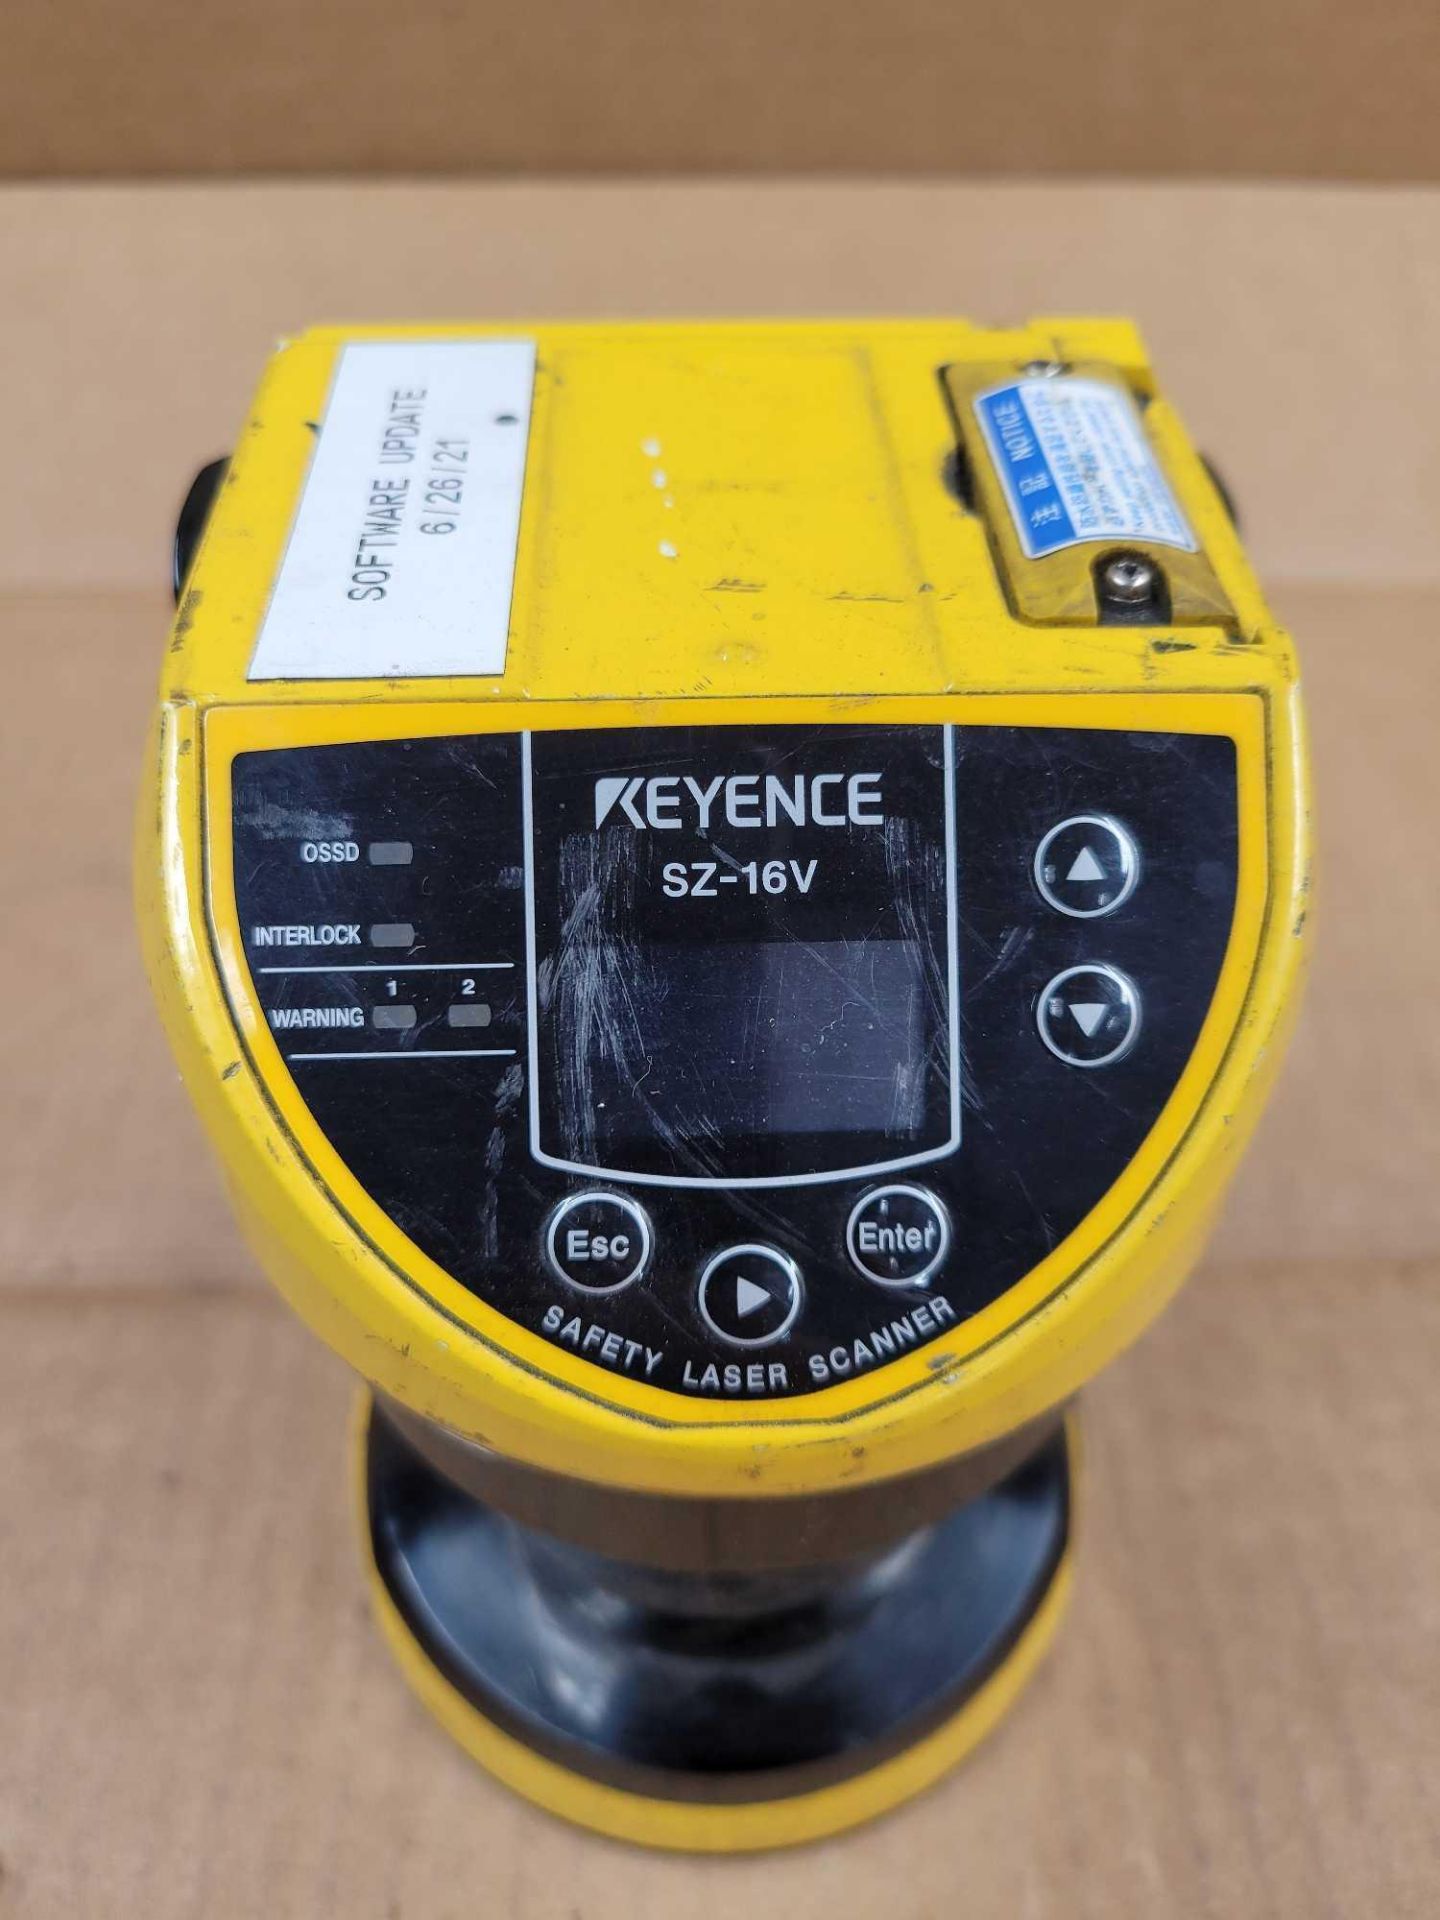 KEYENCE SZ-16V / Safety Laser Scanner  /  Lot Weight: 4.2 lbs - Image 2 of 9